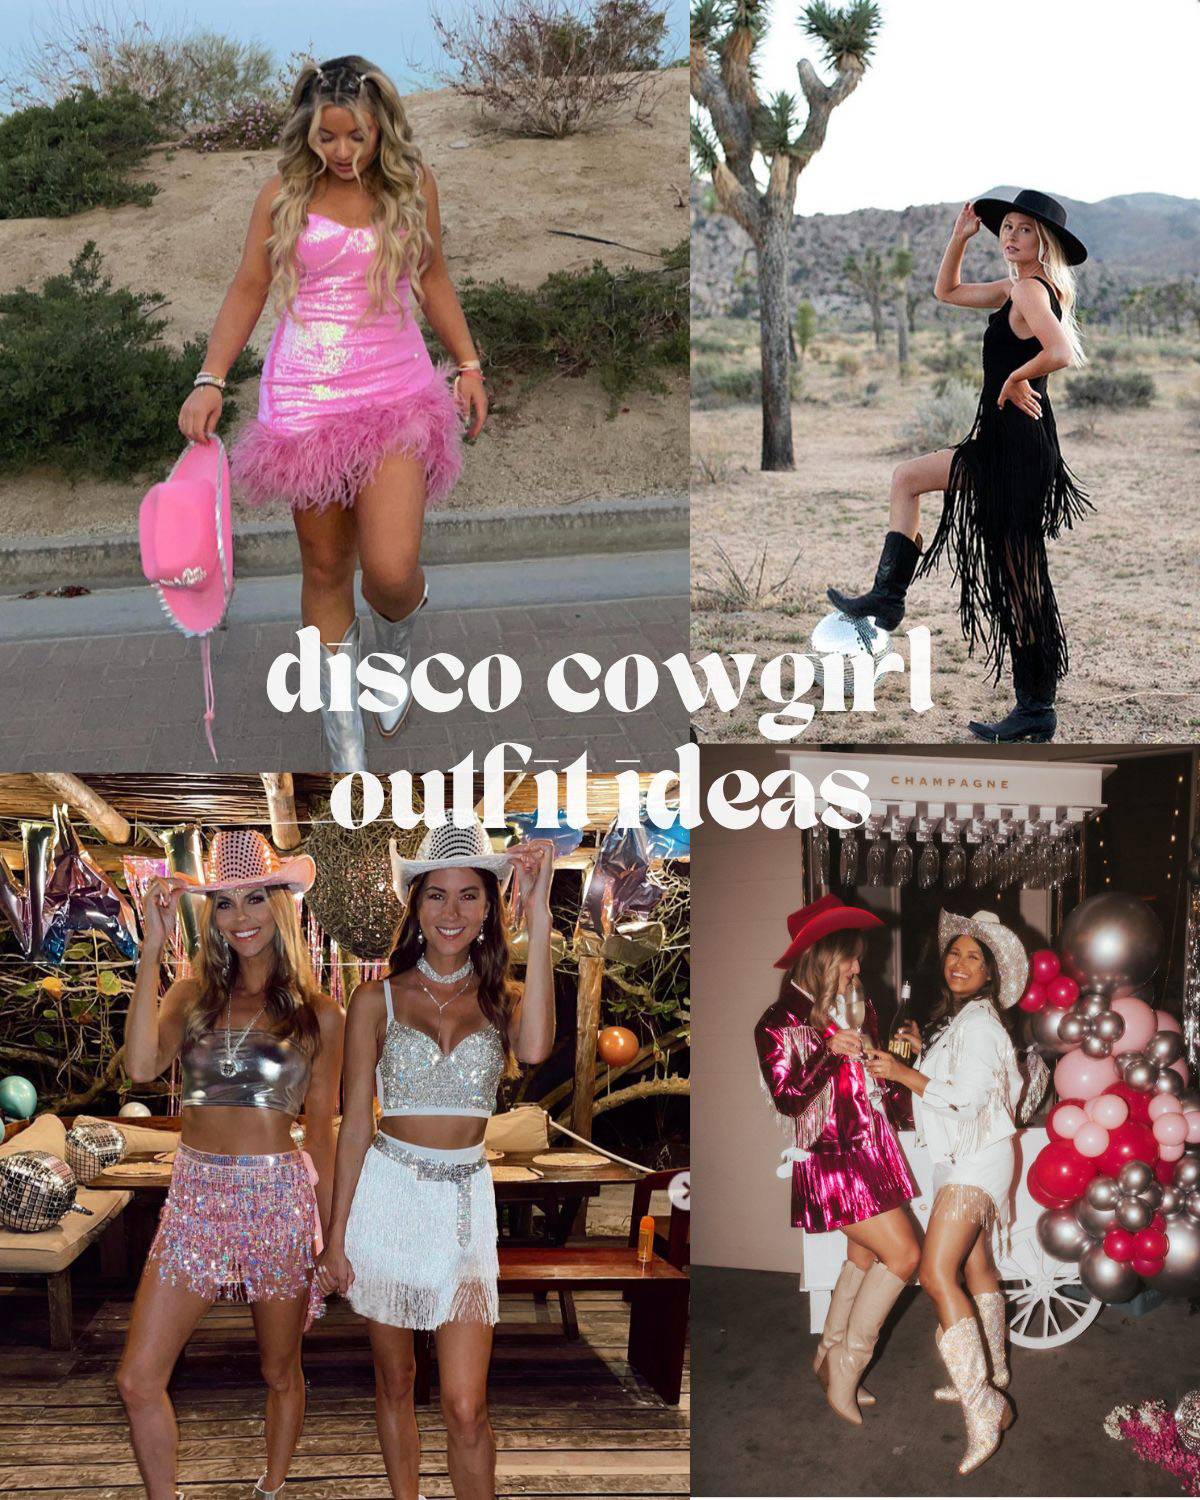 Four outfit ideas for the disco cowgirl theme